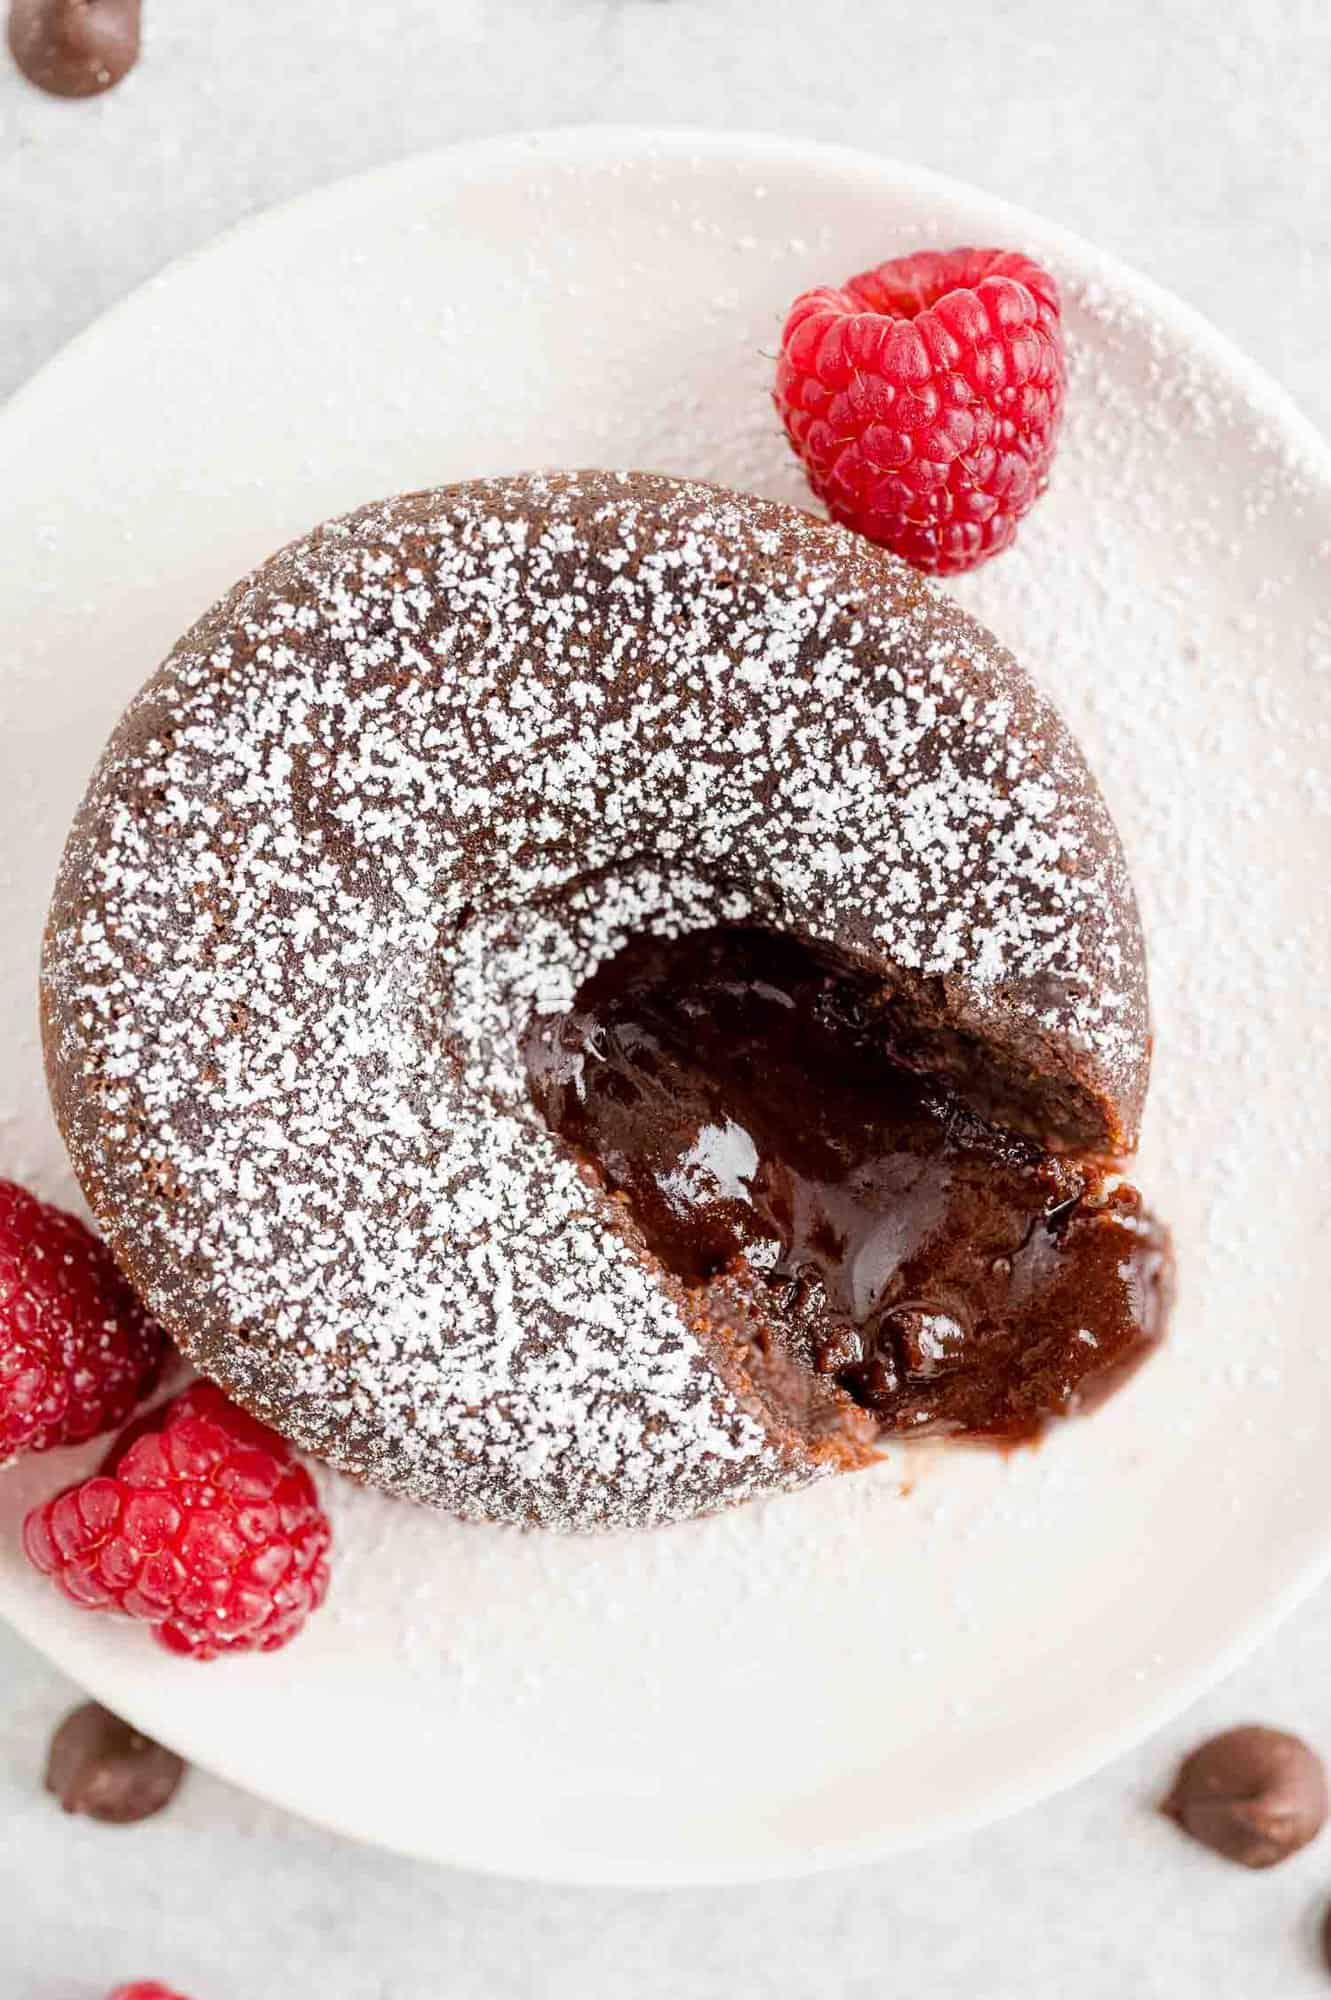 Chocolate filling oozing out of powdered sugar dusted cake.